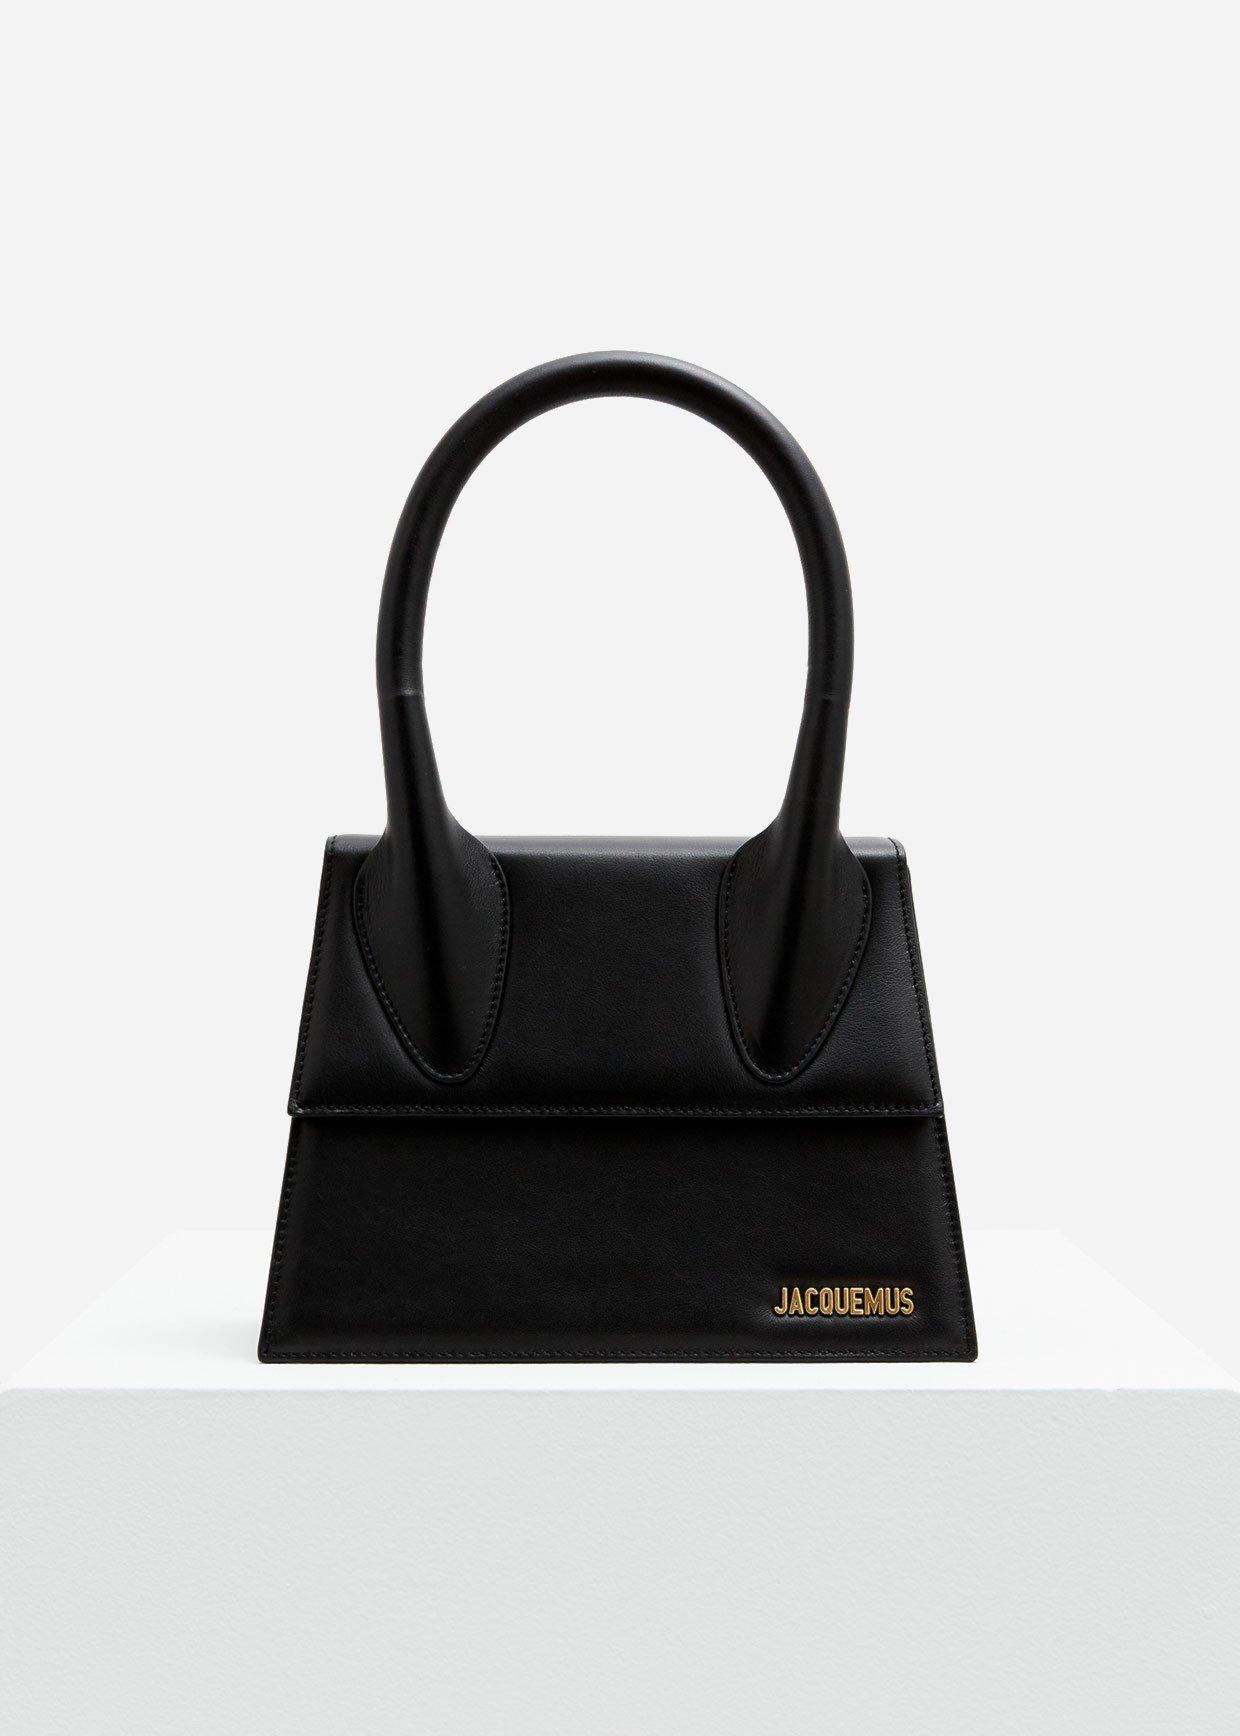 Jacquemus Leather Le Grand Chiquito Bag In Black - Lyst